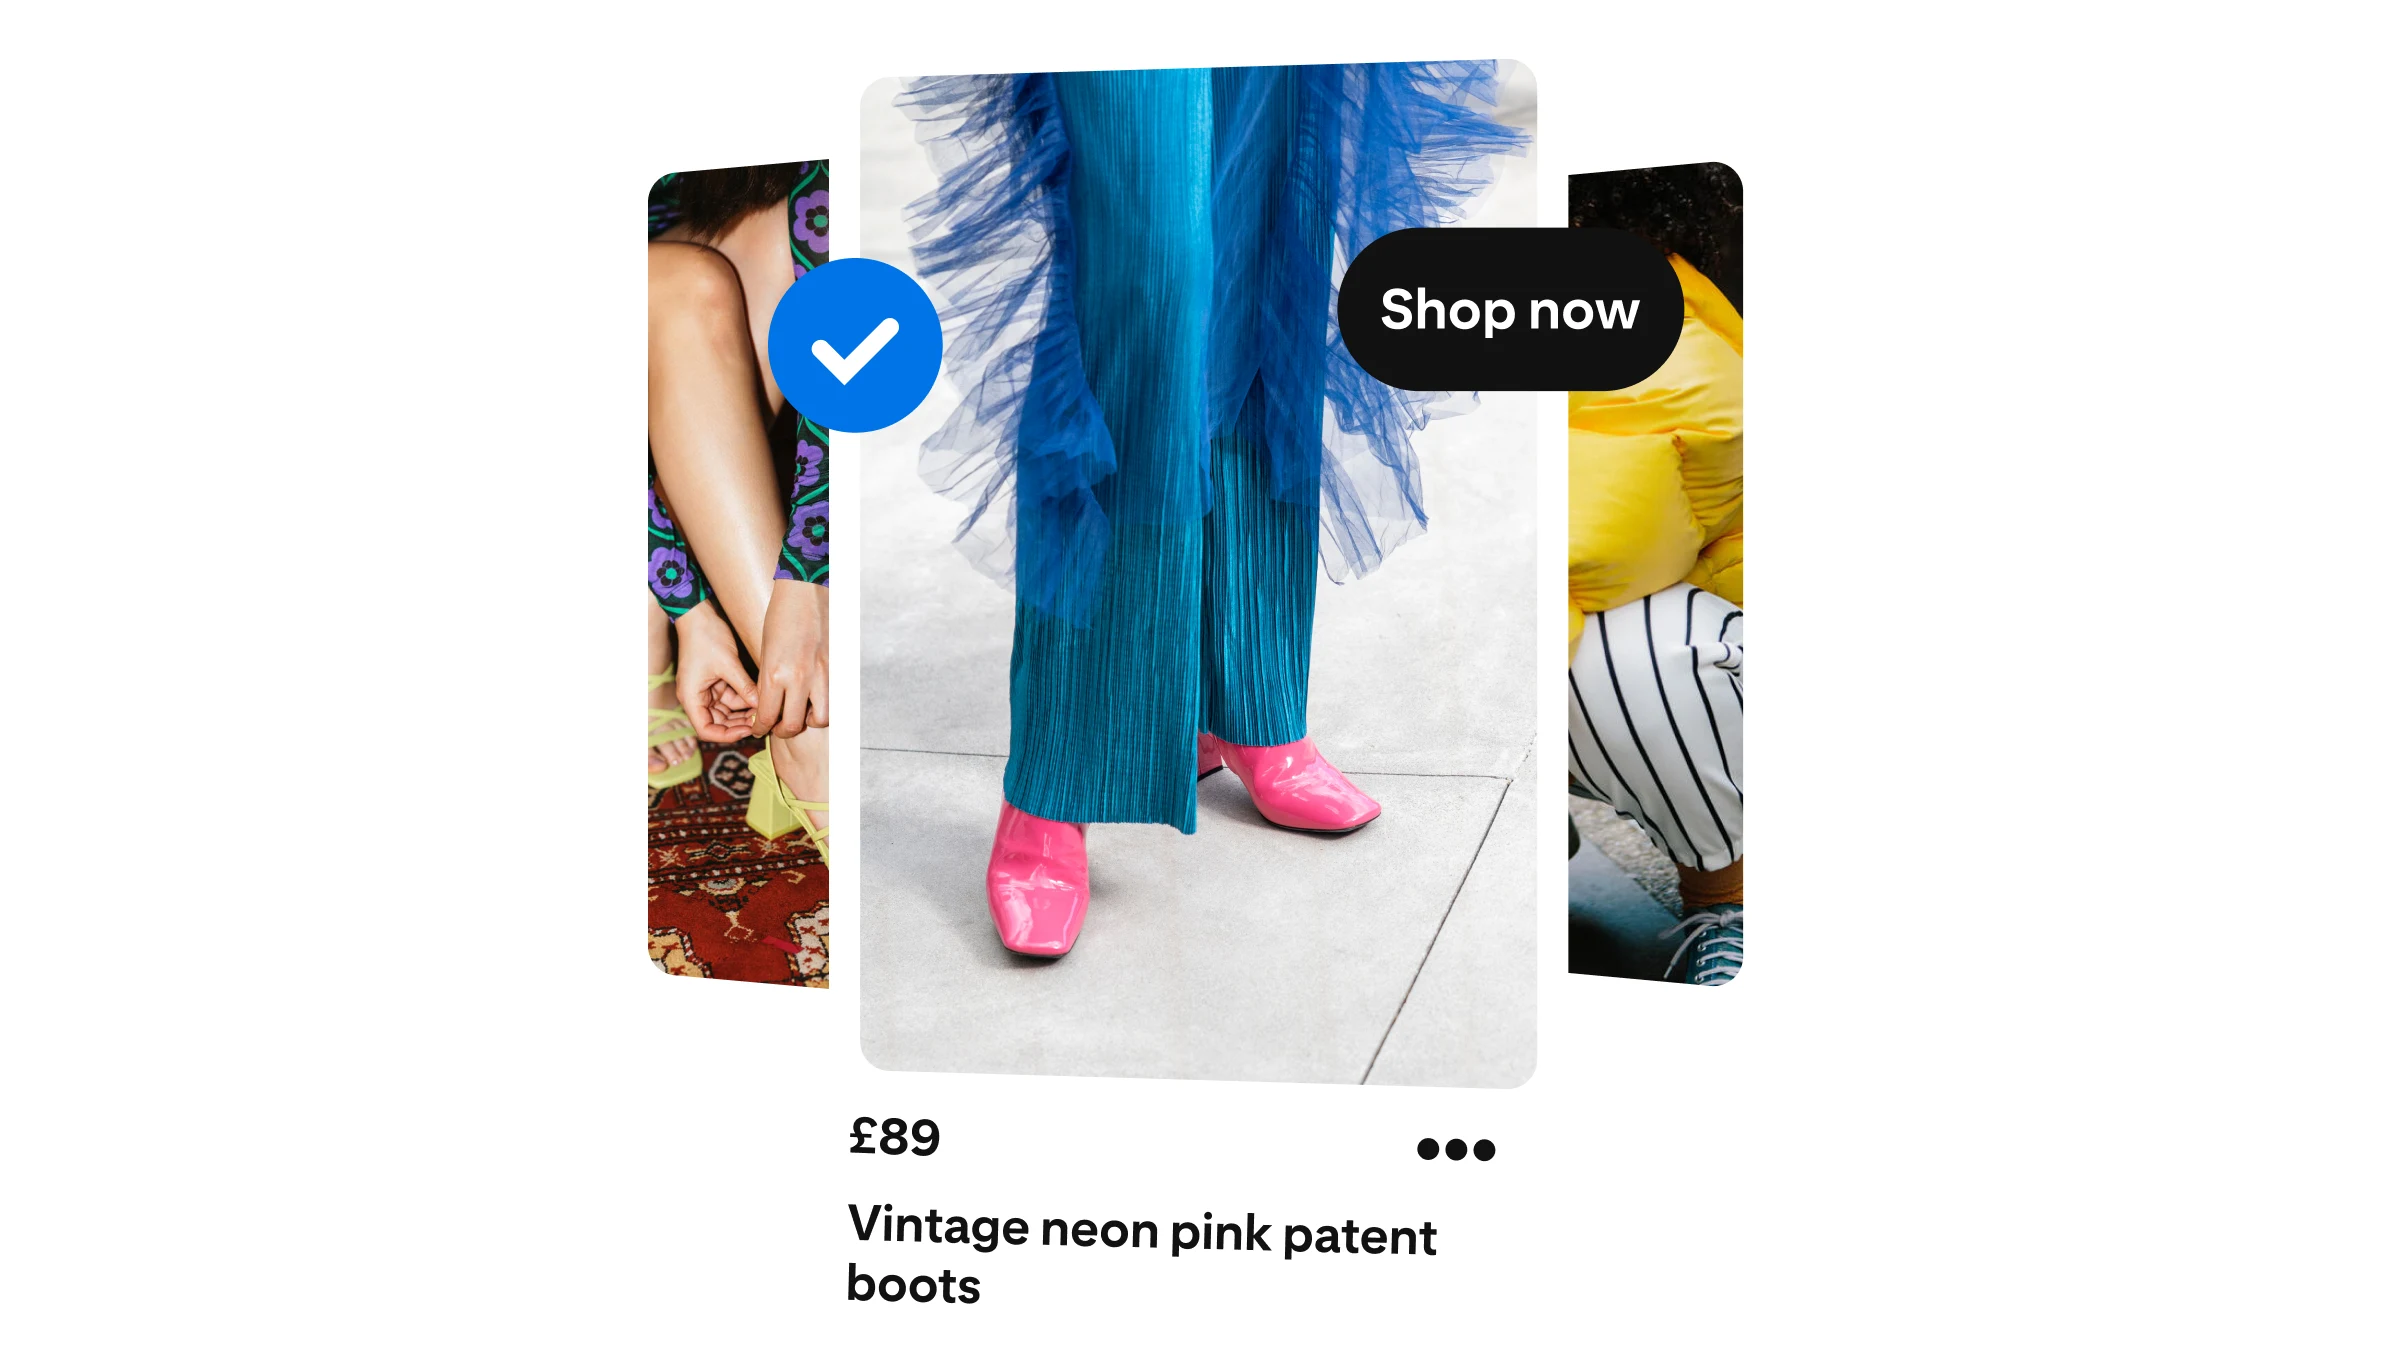 An ad with blue trousers and pink shoes encourages people to shop.